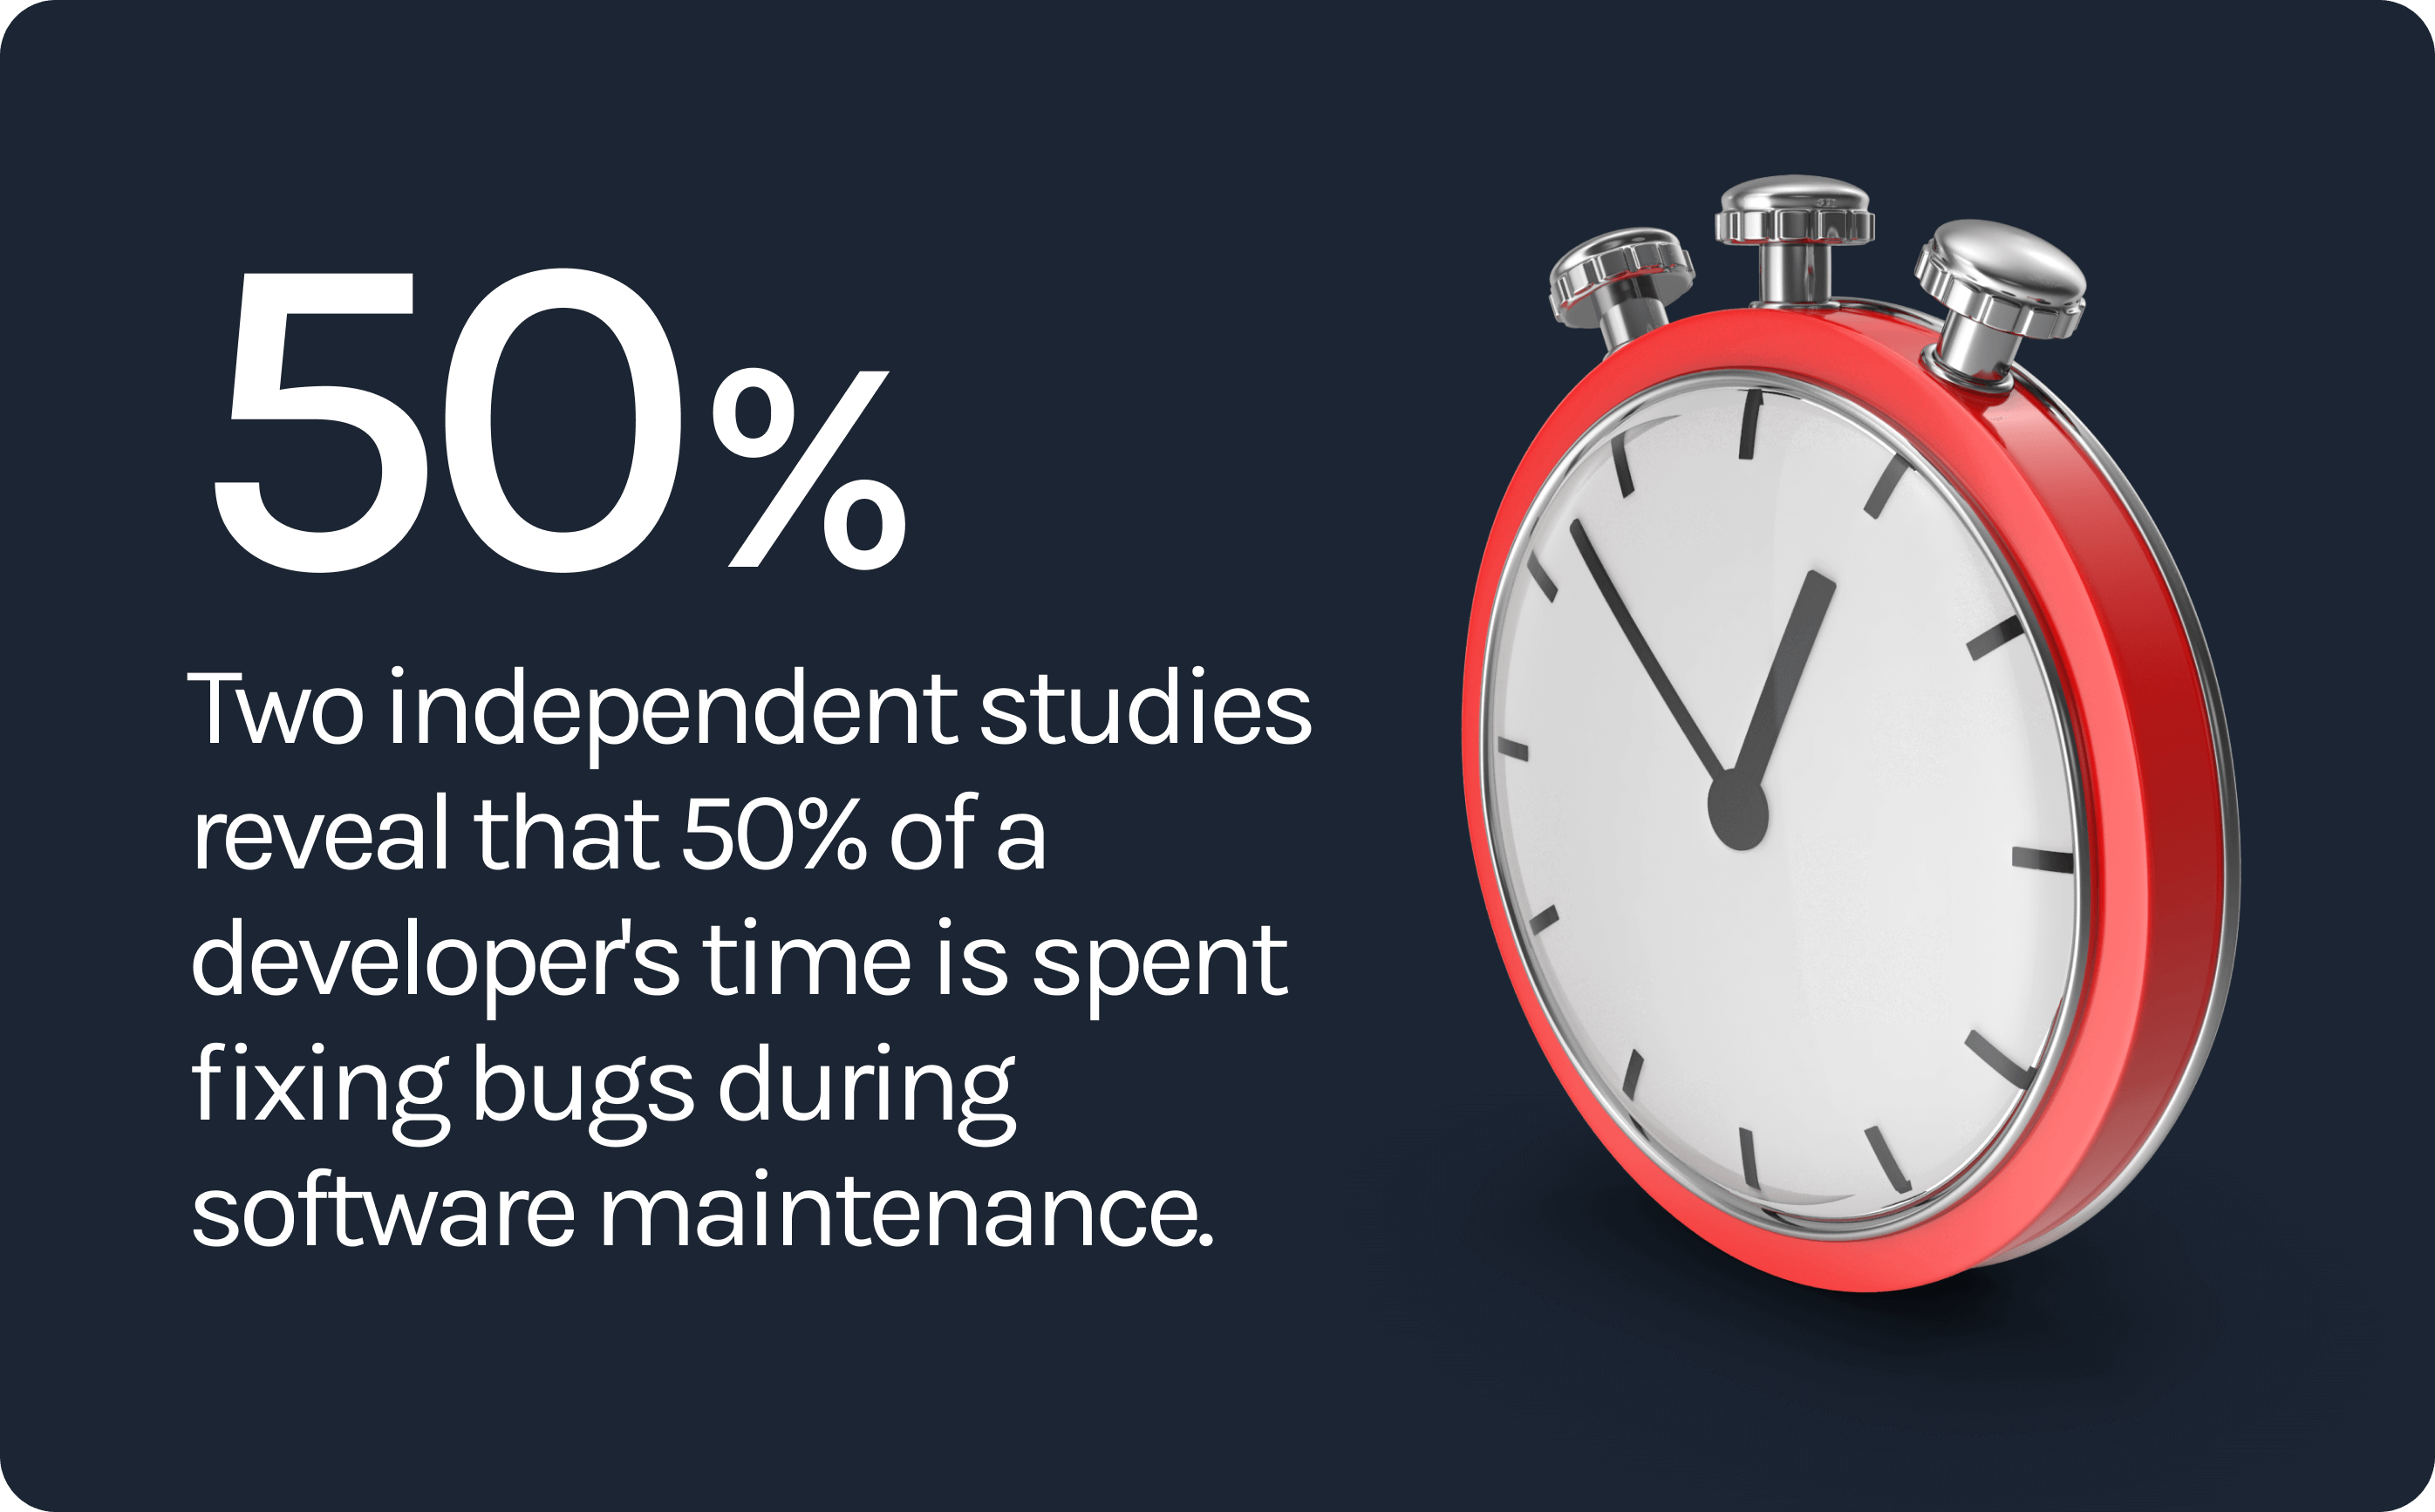 Two independent studies reveal that 50% of a developer's time is spent fixing bugs during software maintenance.